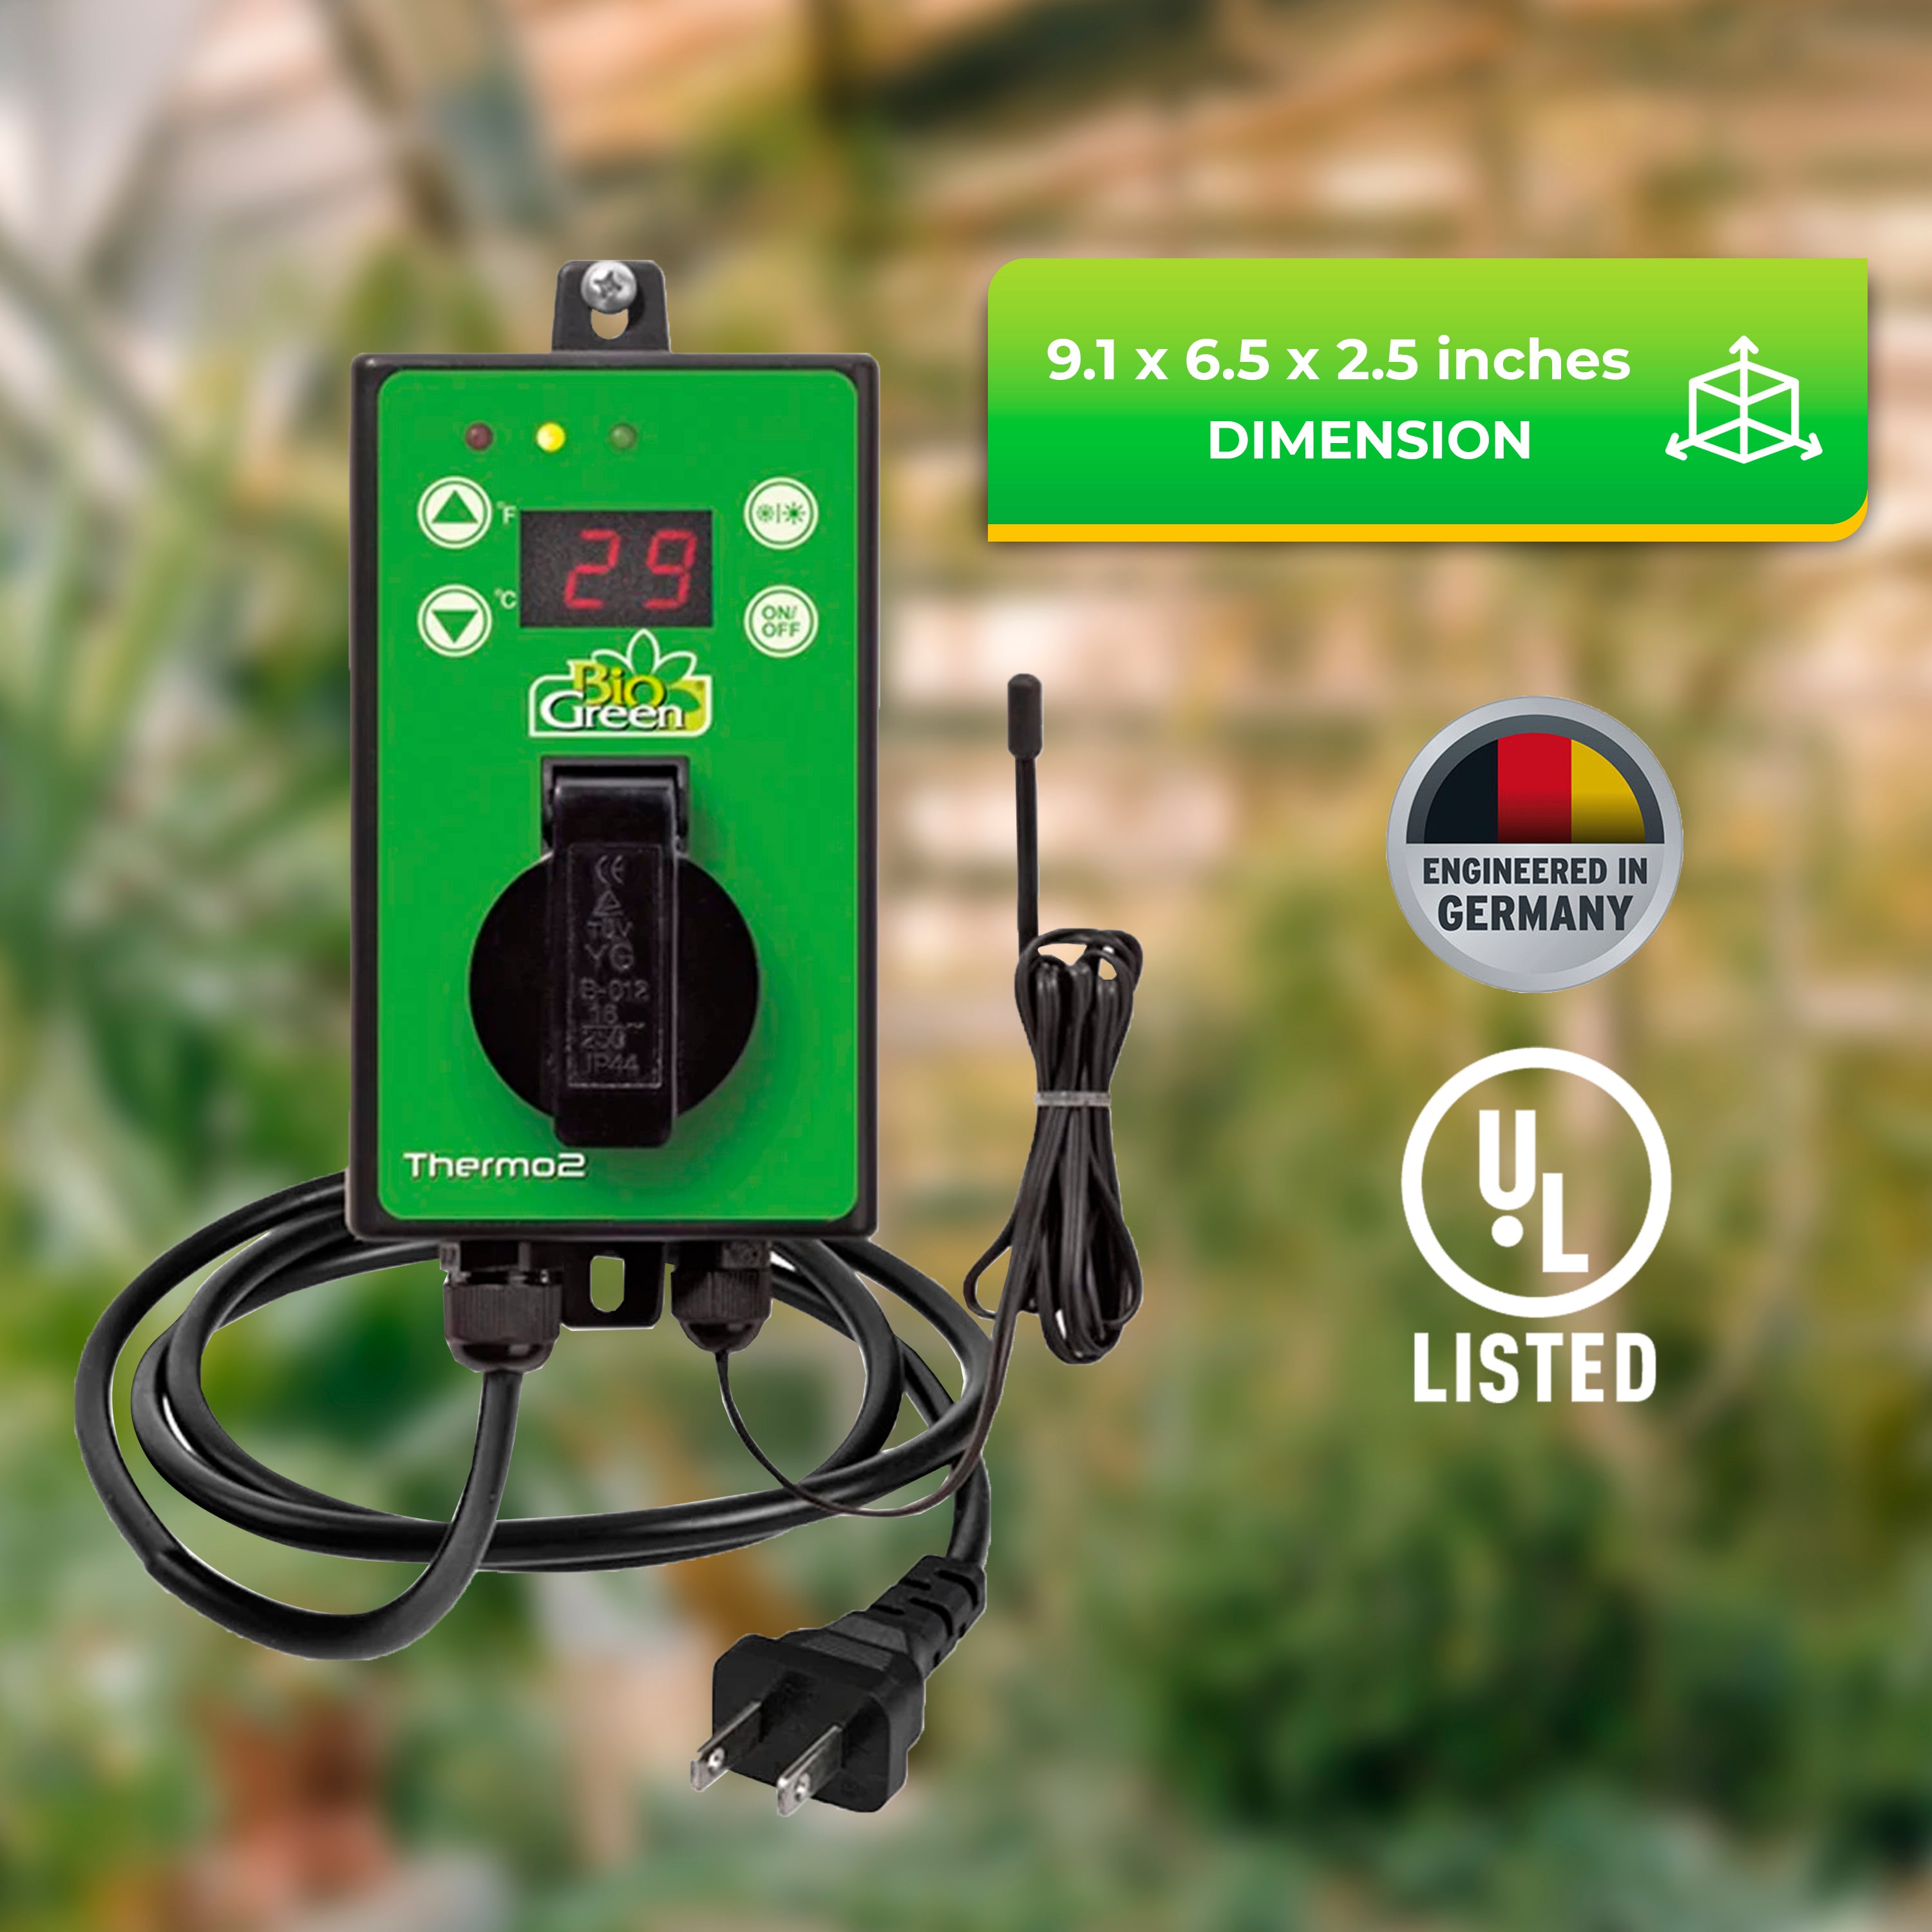 Bio Green TER2_US BioGreen TER2/US Thermo 2 Digital Greenhouse Thermostat  with Summer/Winter Function 2 Years Warrenty